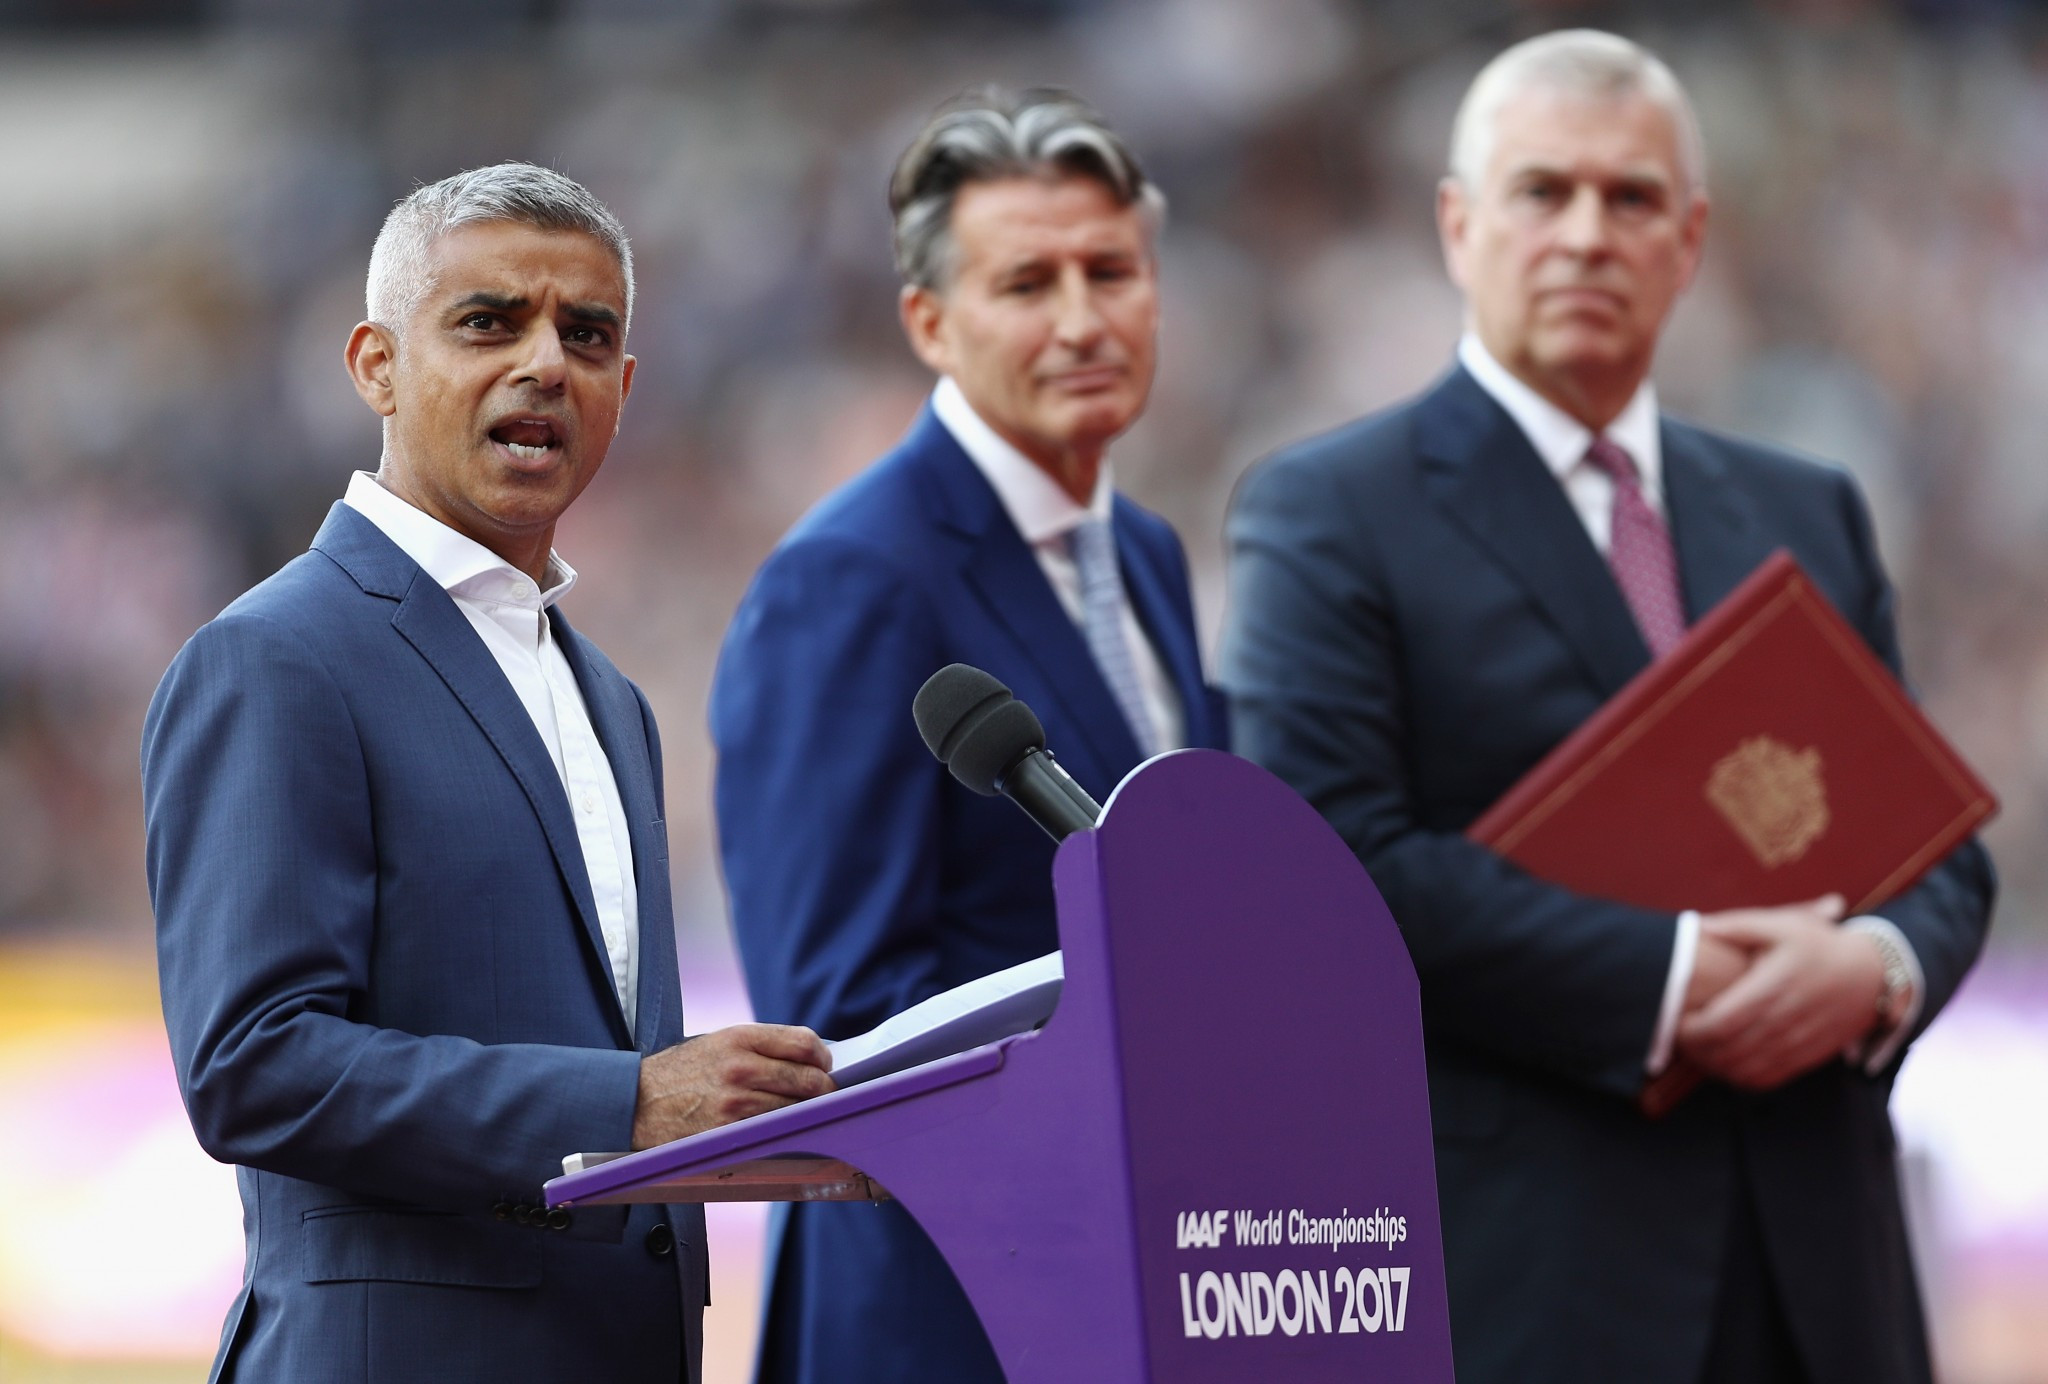 London Mayor Sadiq Khan, left, spoke to open the World Championships as Sebastian Coe and Prince Andrew look on ©Getty Images
